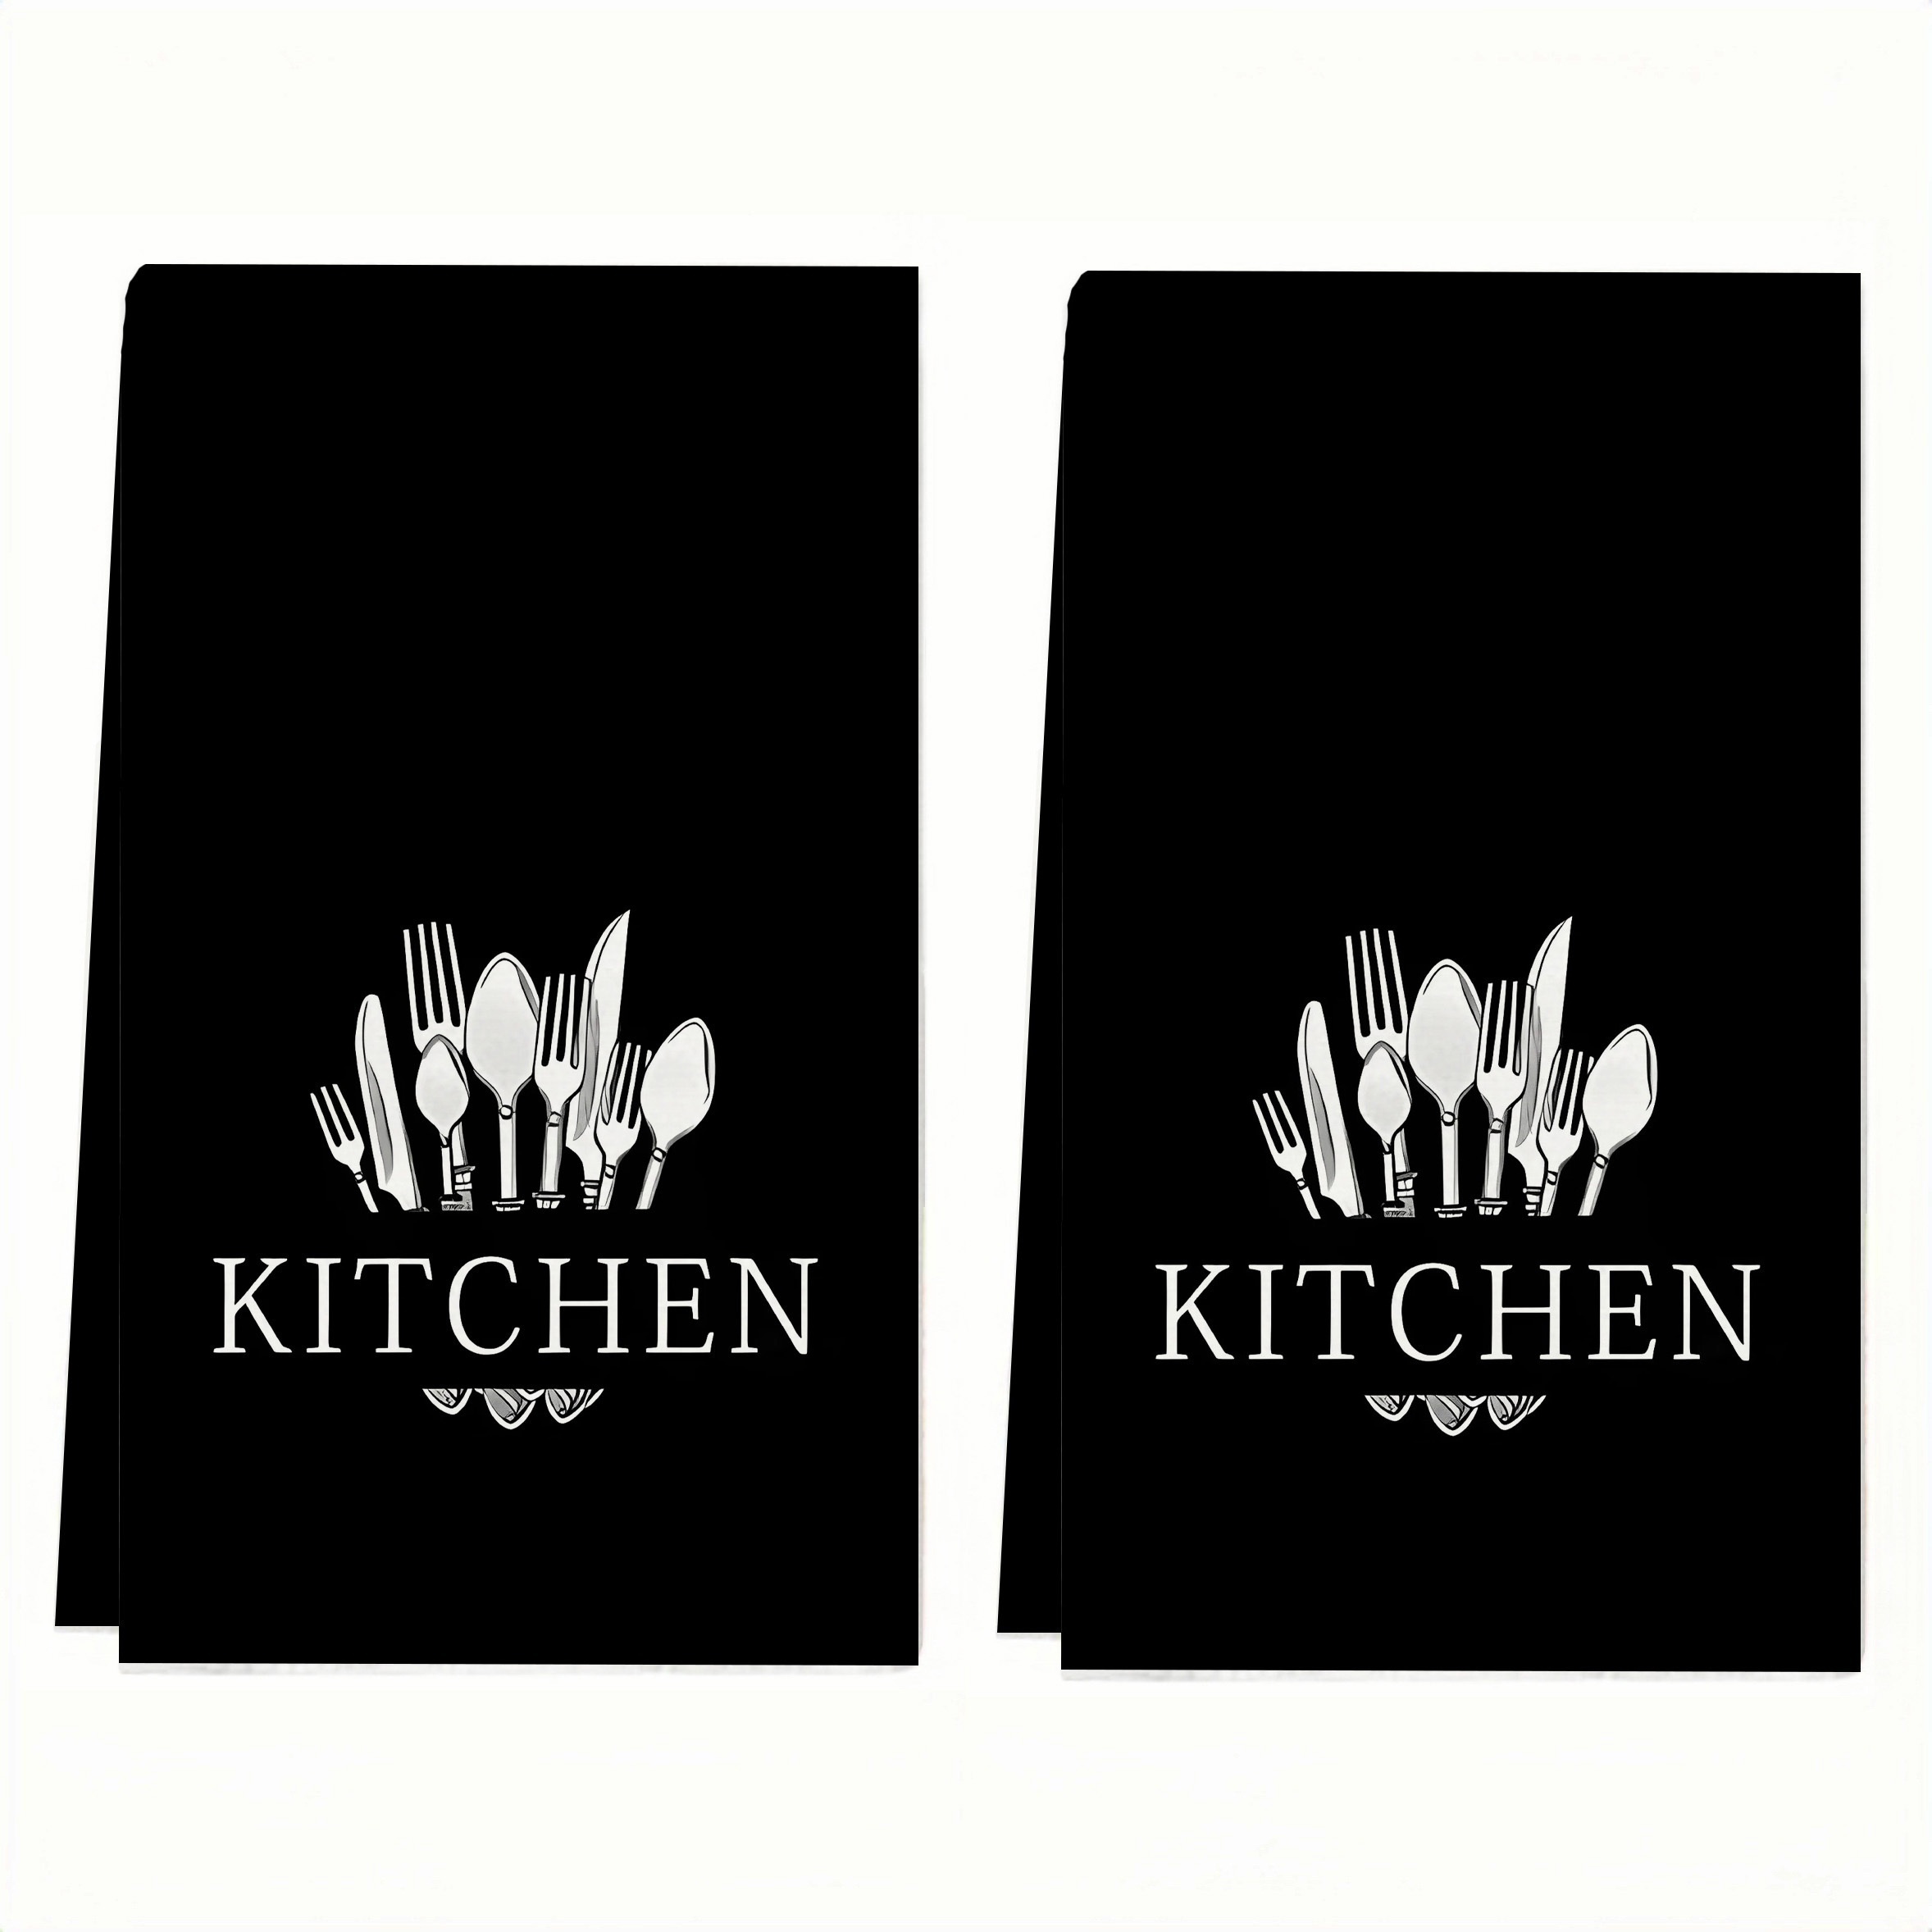 

2-piece Soft & Absorbent Microfiber Kitchen Towels - Spoon & Fork Design, Perfect For Drying Dishes & Hands, Ideal For Holiday Decor & Everyday Use